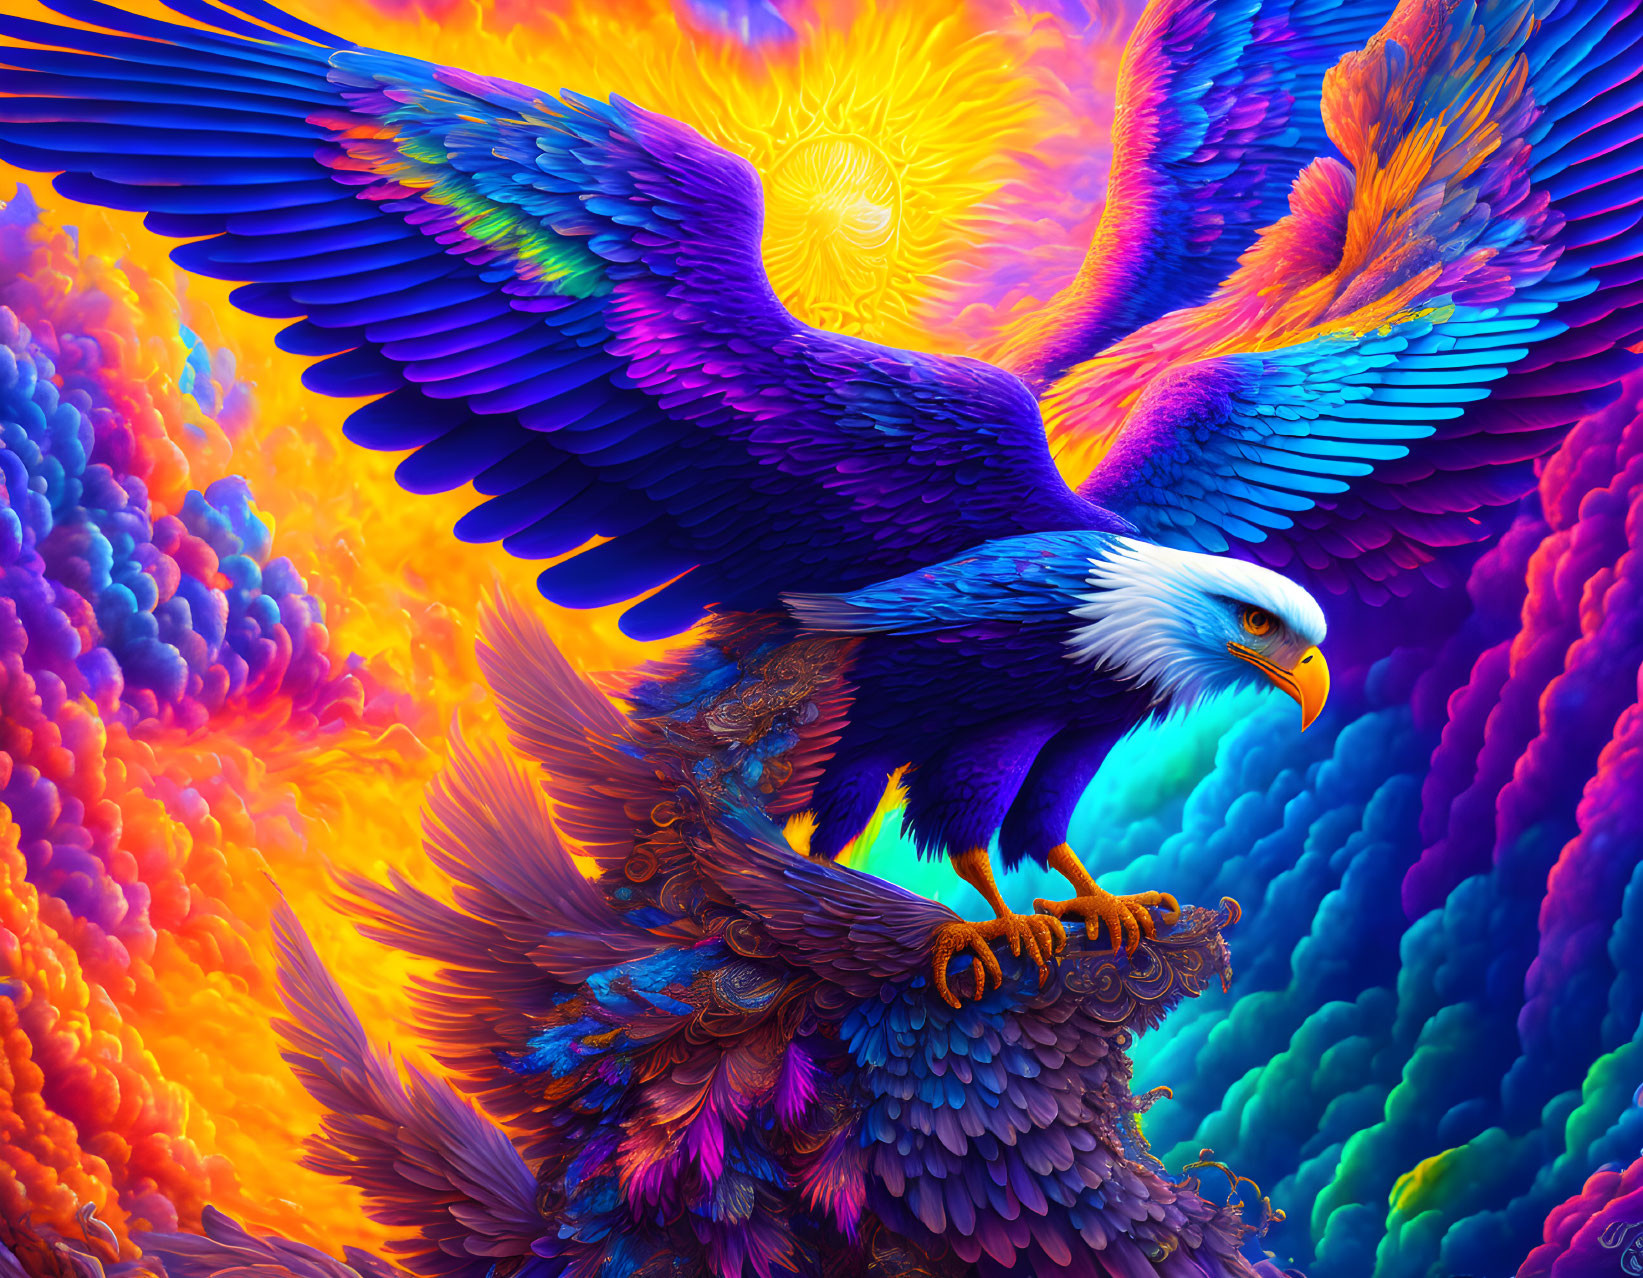 Colorful digital artwork: Majestic eagle soaring amidst psychedelic clouds and radiant sun